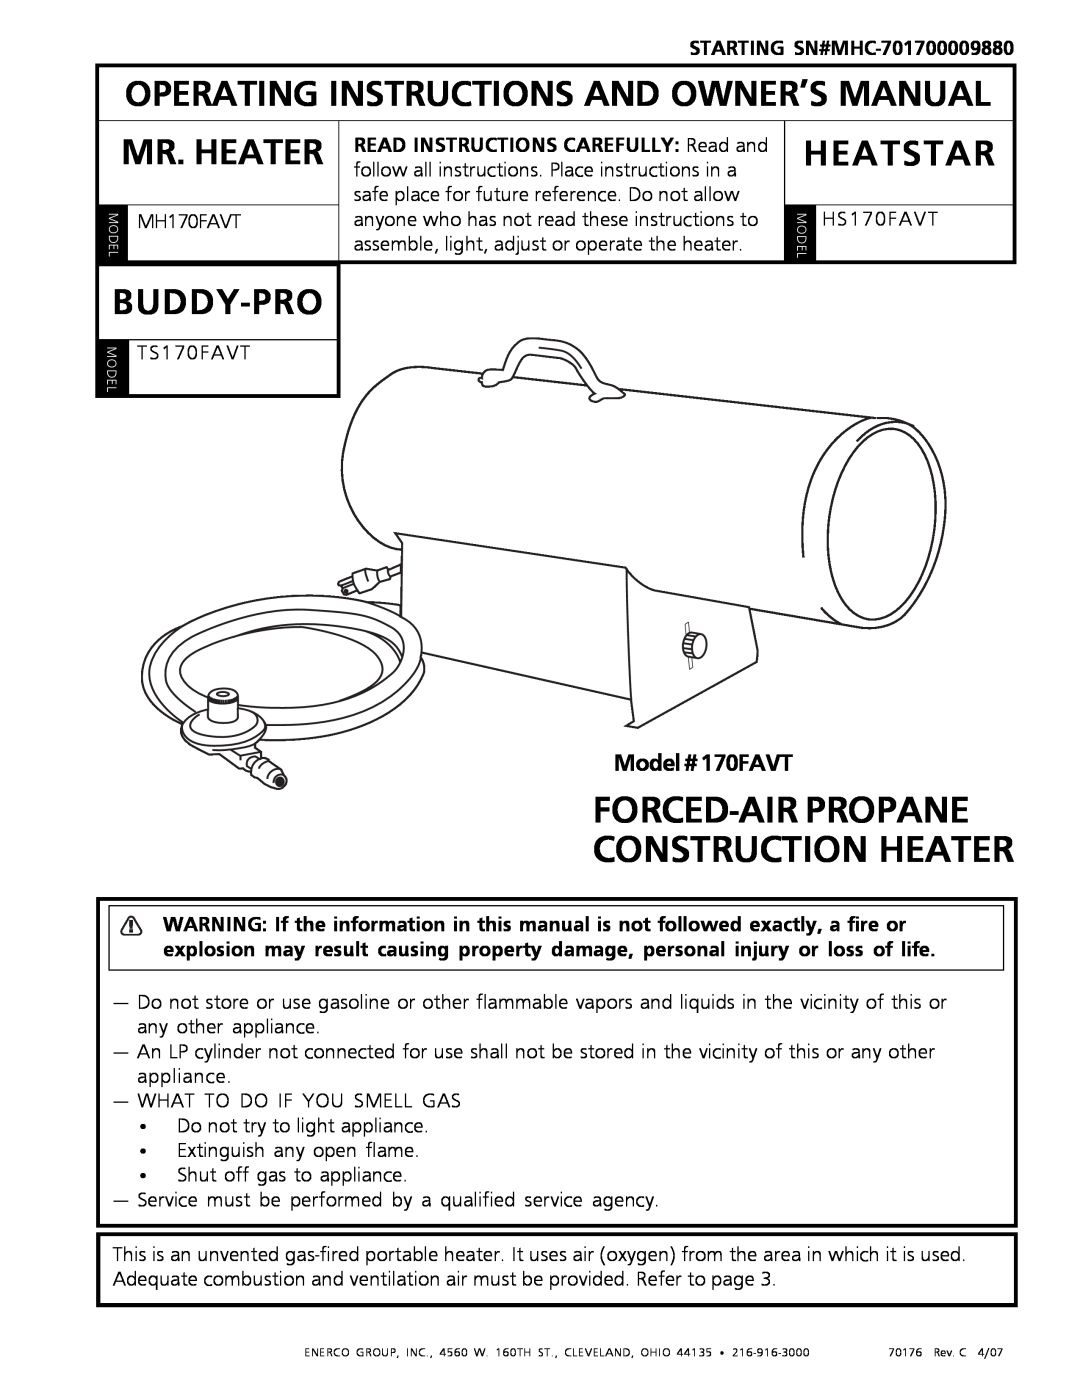 Enerco owner manual Model - MH170FAVT, Forced-Airpropane Construction Heater 